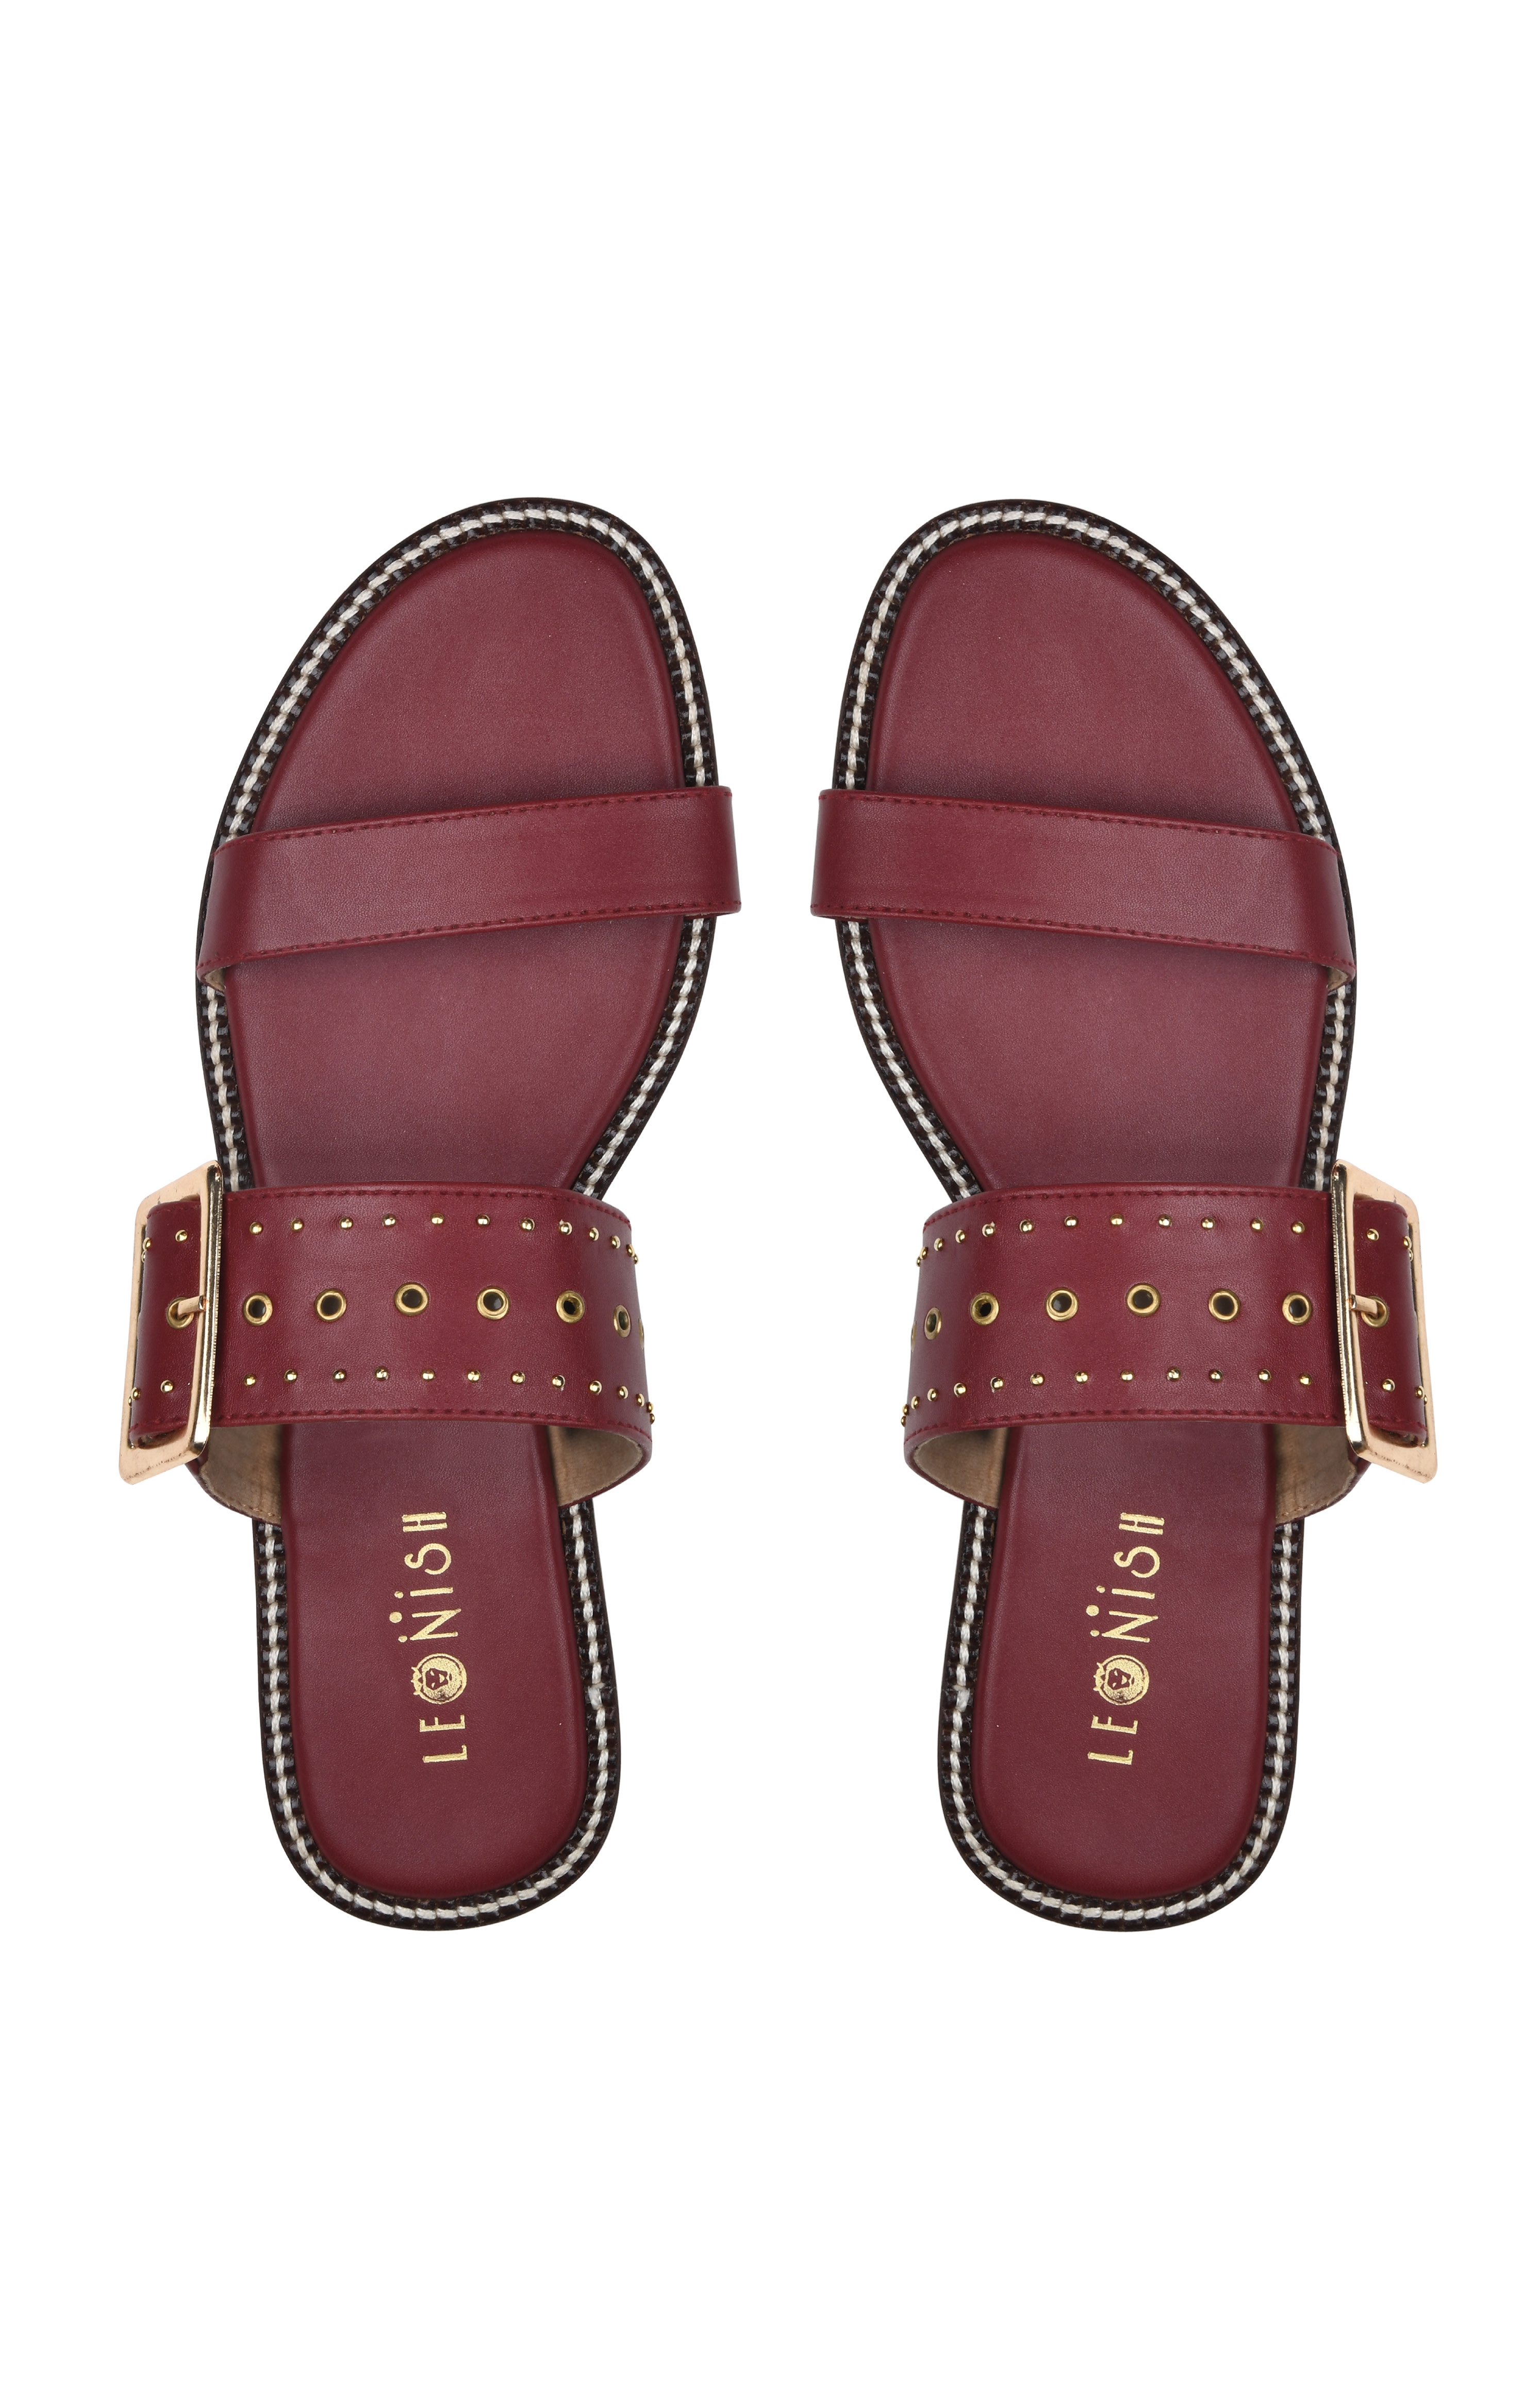 Buckle and Glide - Maroon